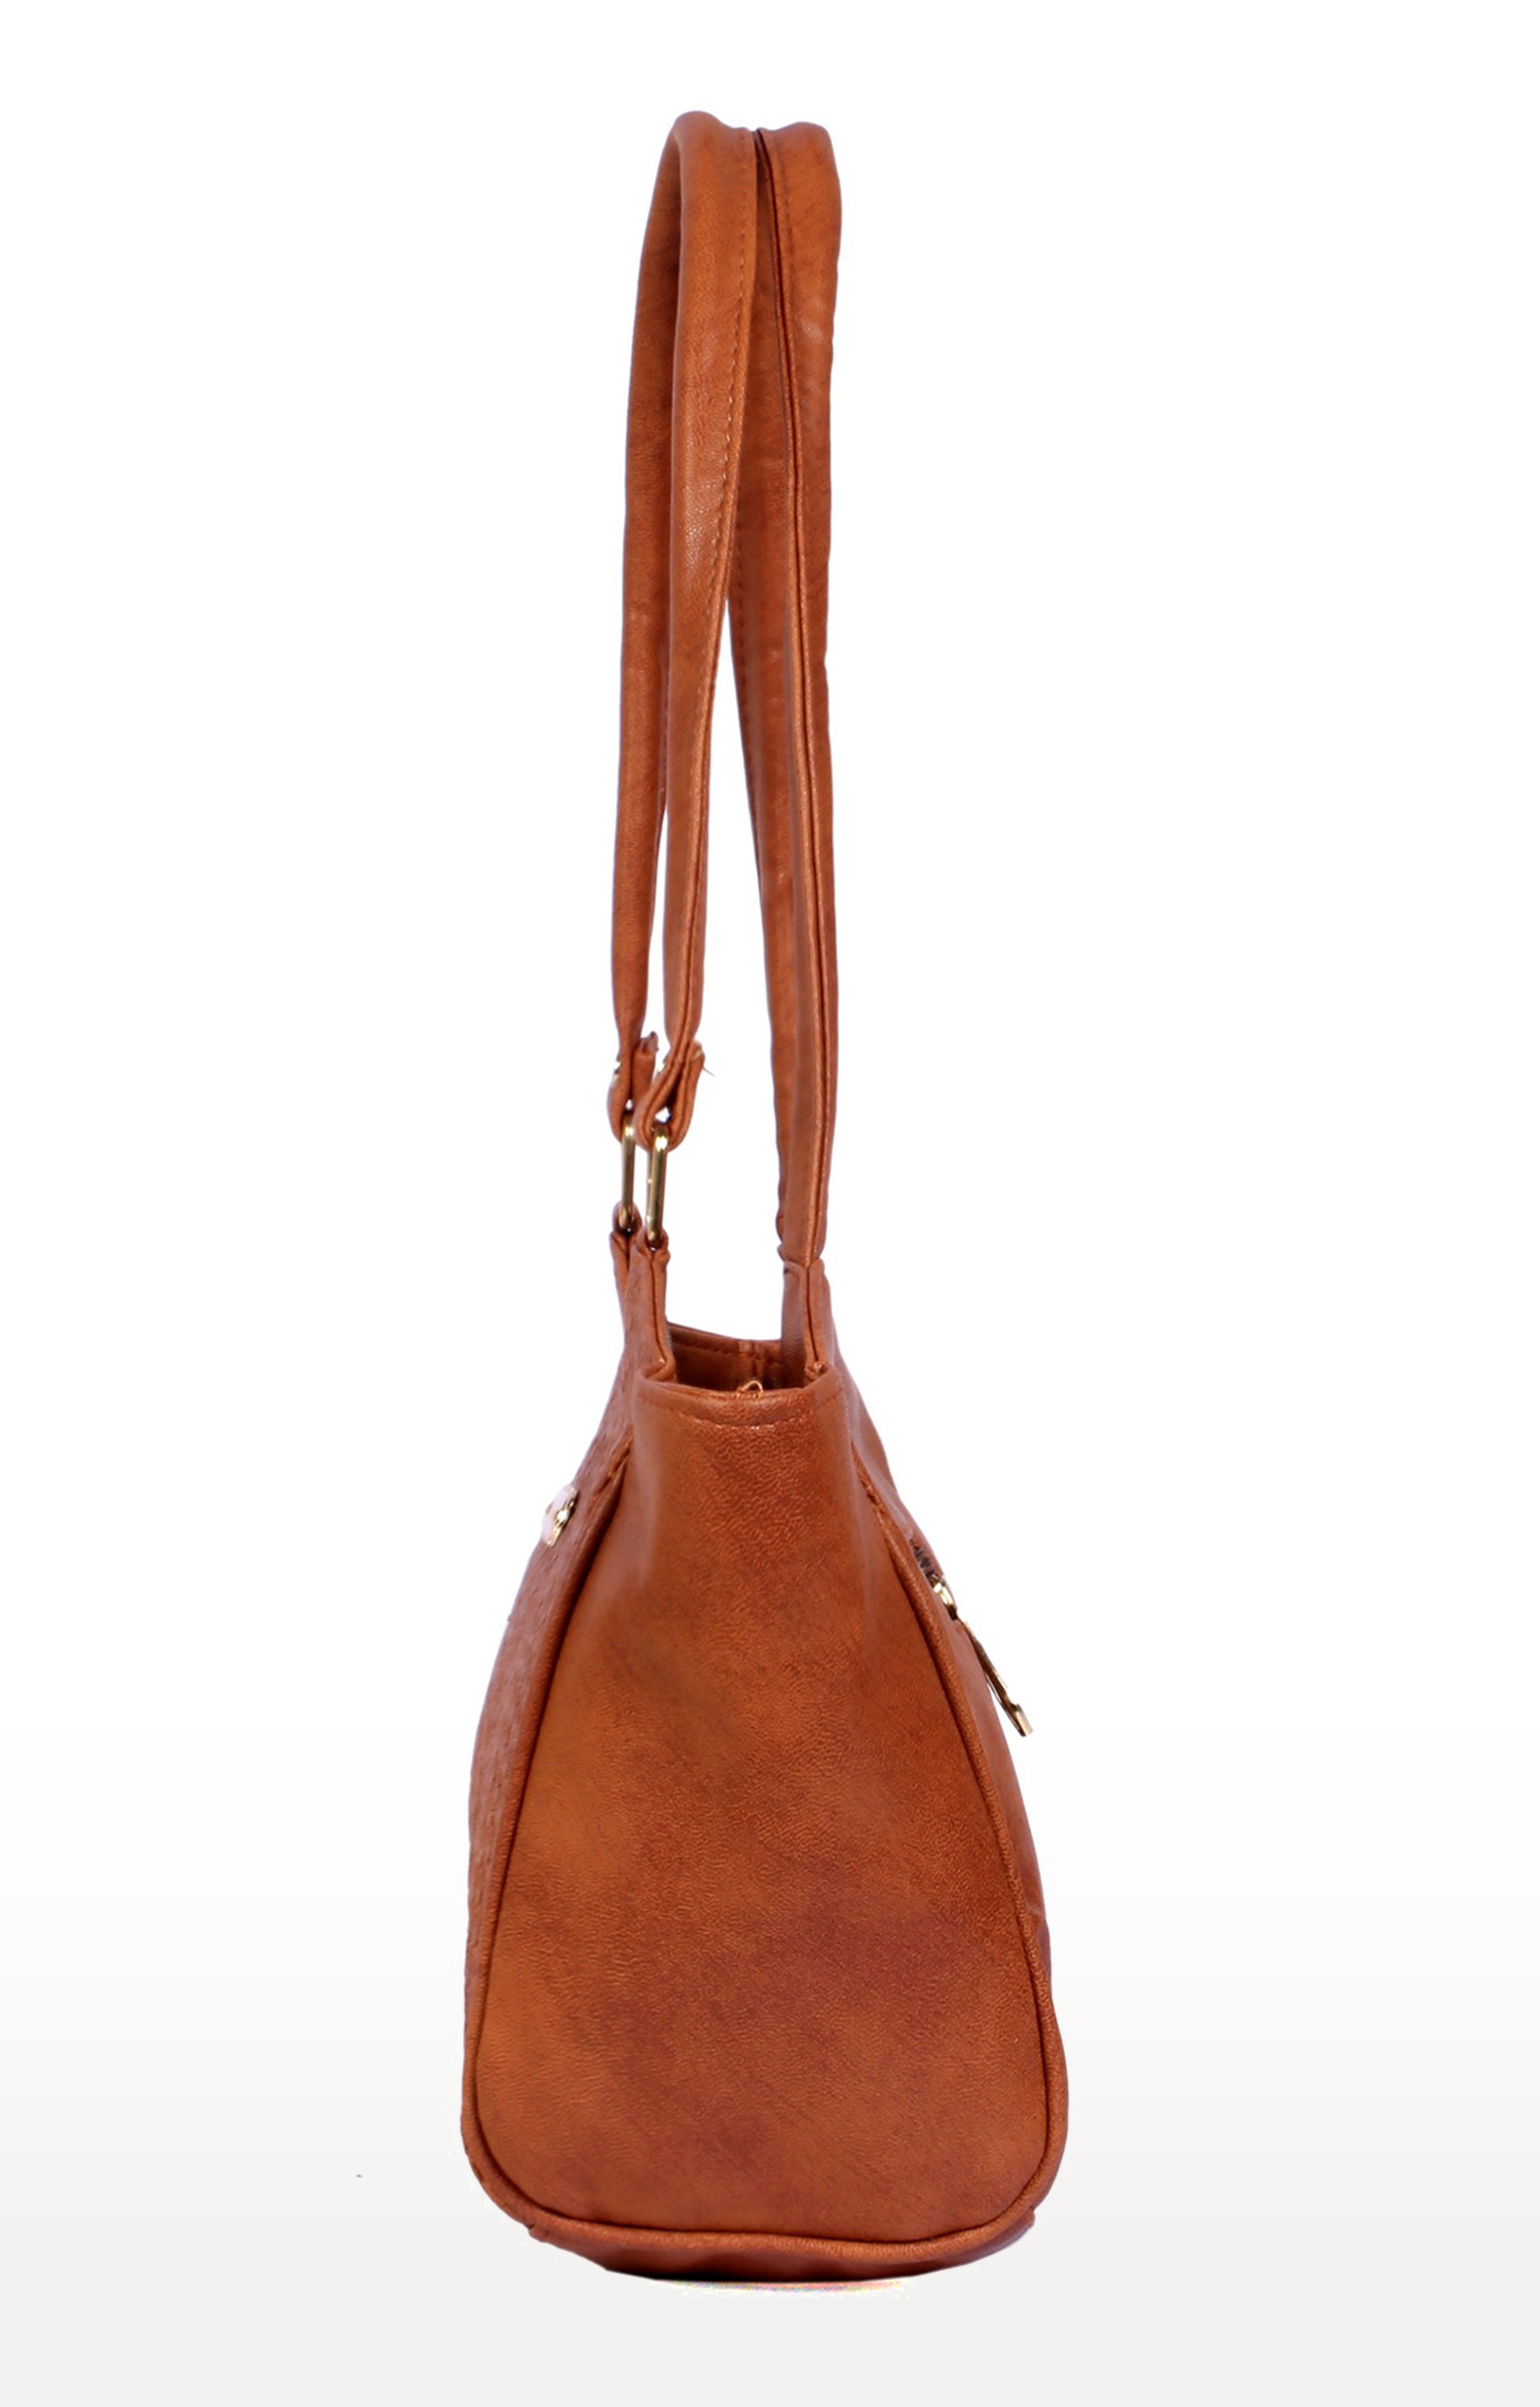 EMM | Lely's Beautiful Women's Handbag With Latest Shades -Brown 3